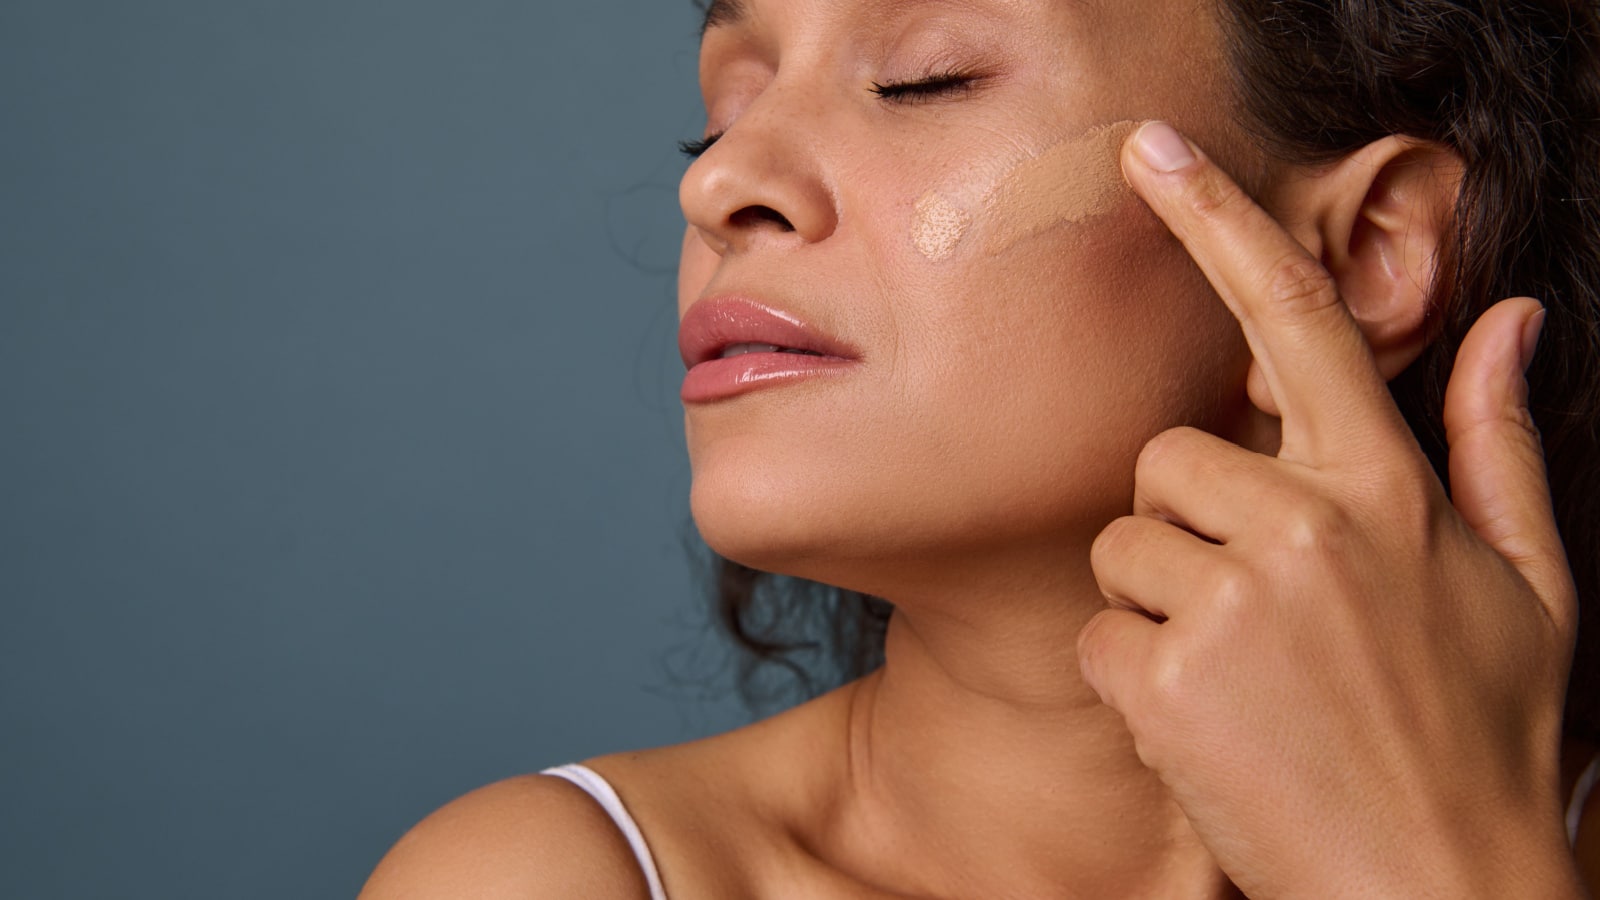 Close-up of attractive woman with her eyes closed applying liquid tonal foundation fluid on her face with her finger, posing against gray wall background with copy space. Make-up, skin care concept